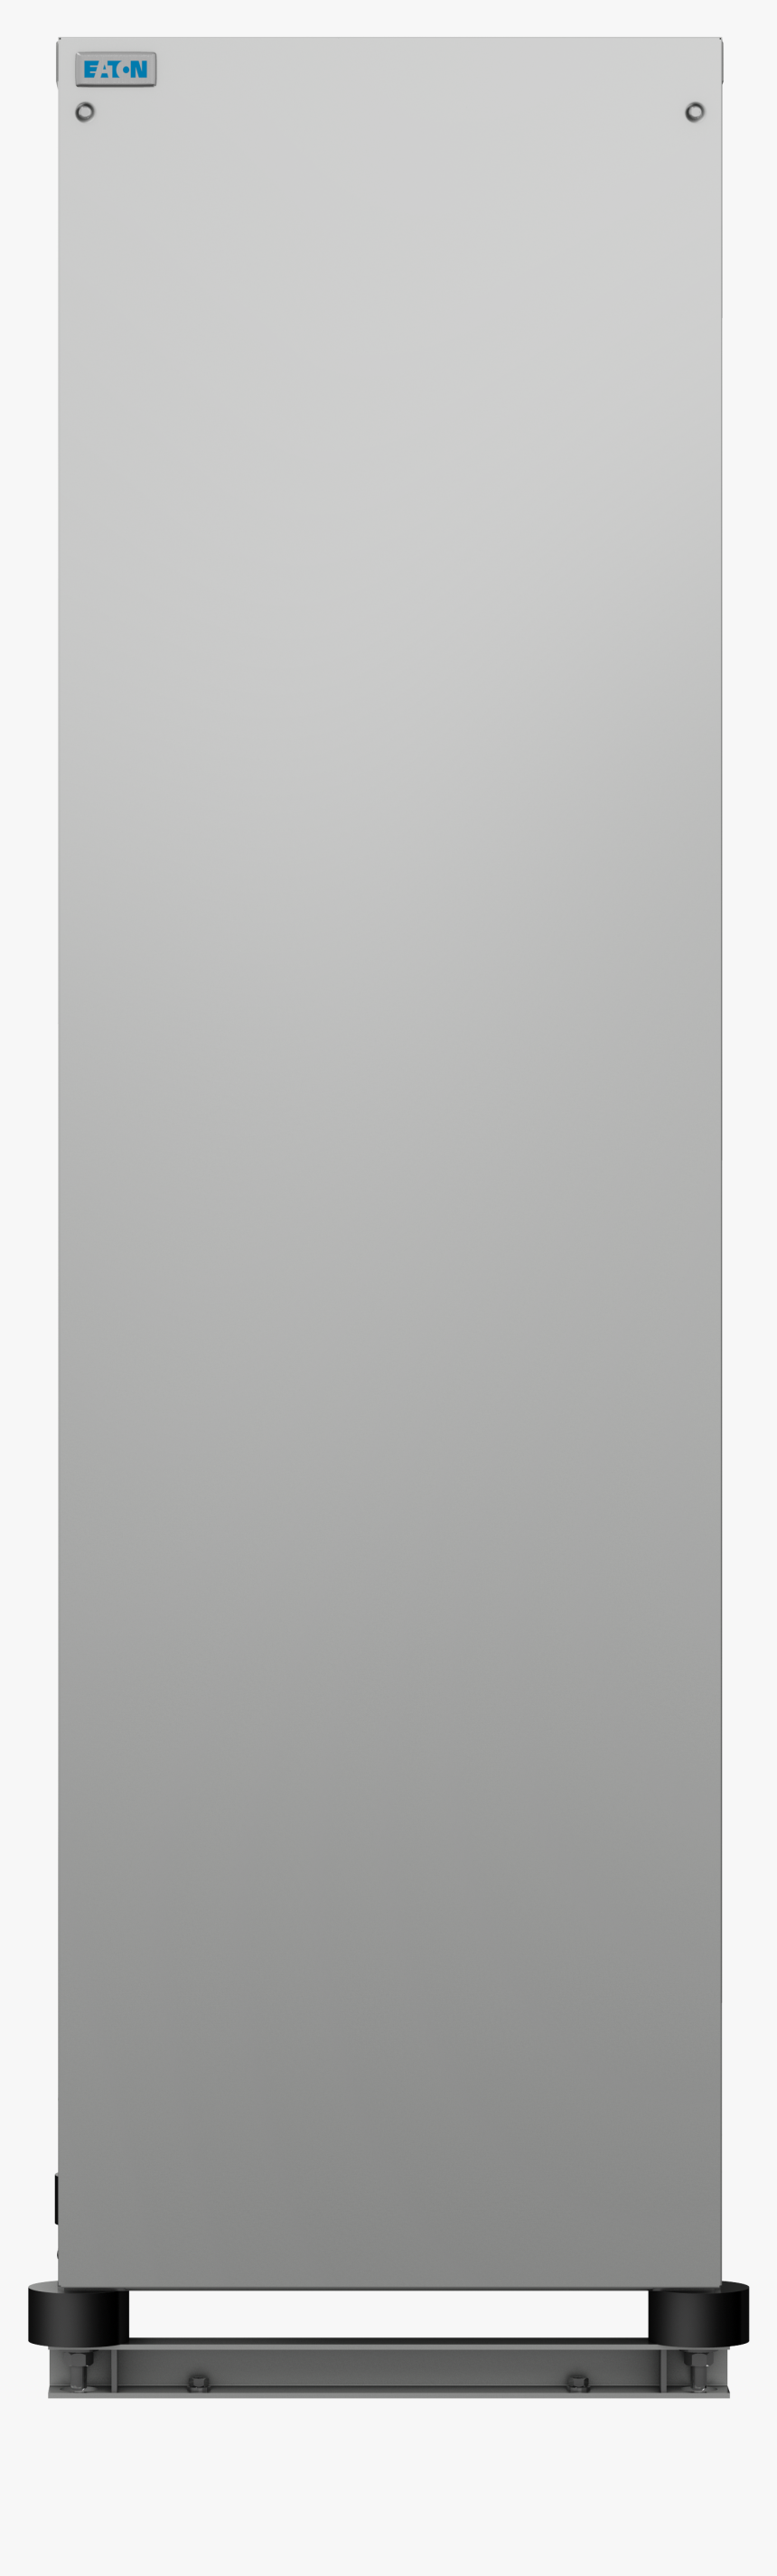 Home .png, Transparent Png, Free Download